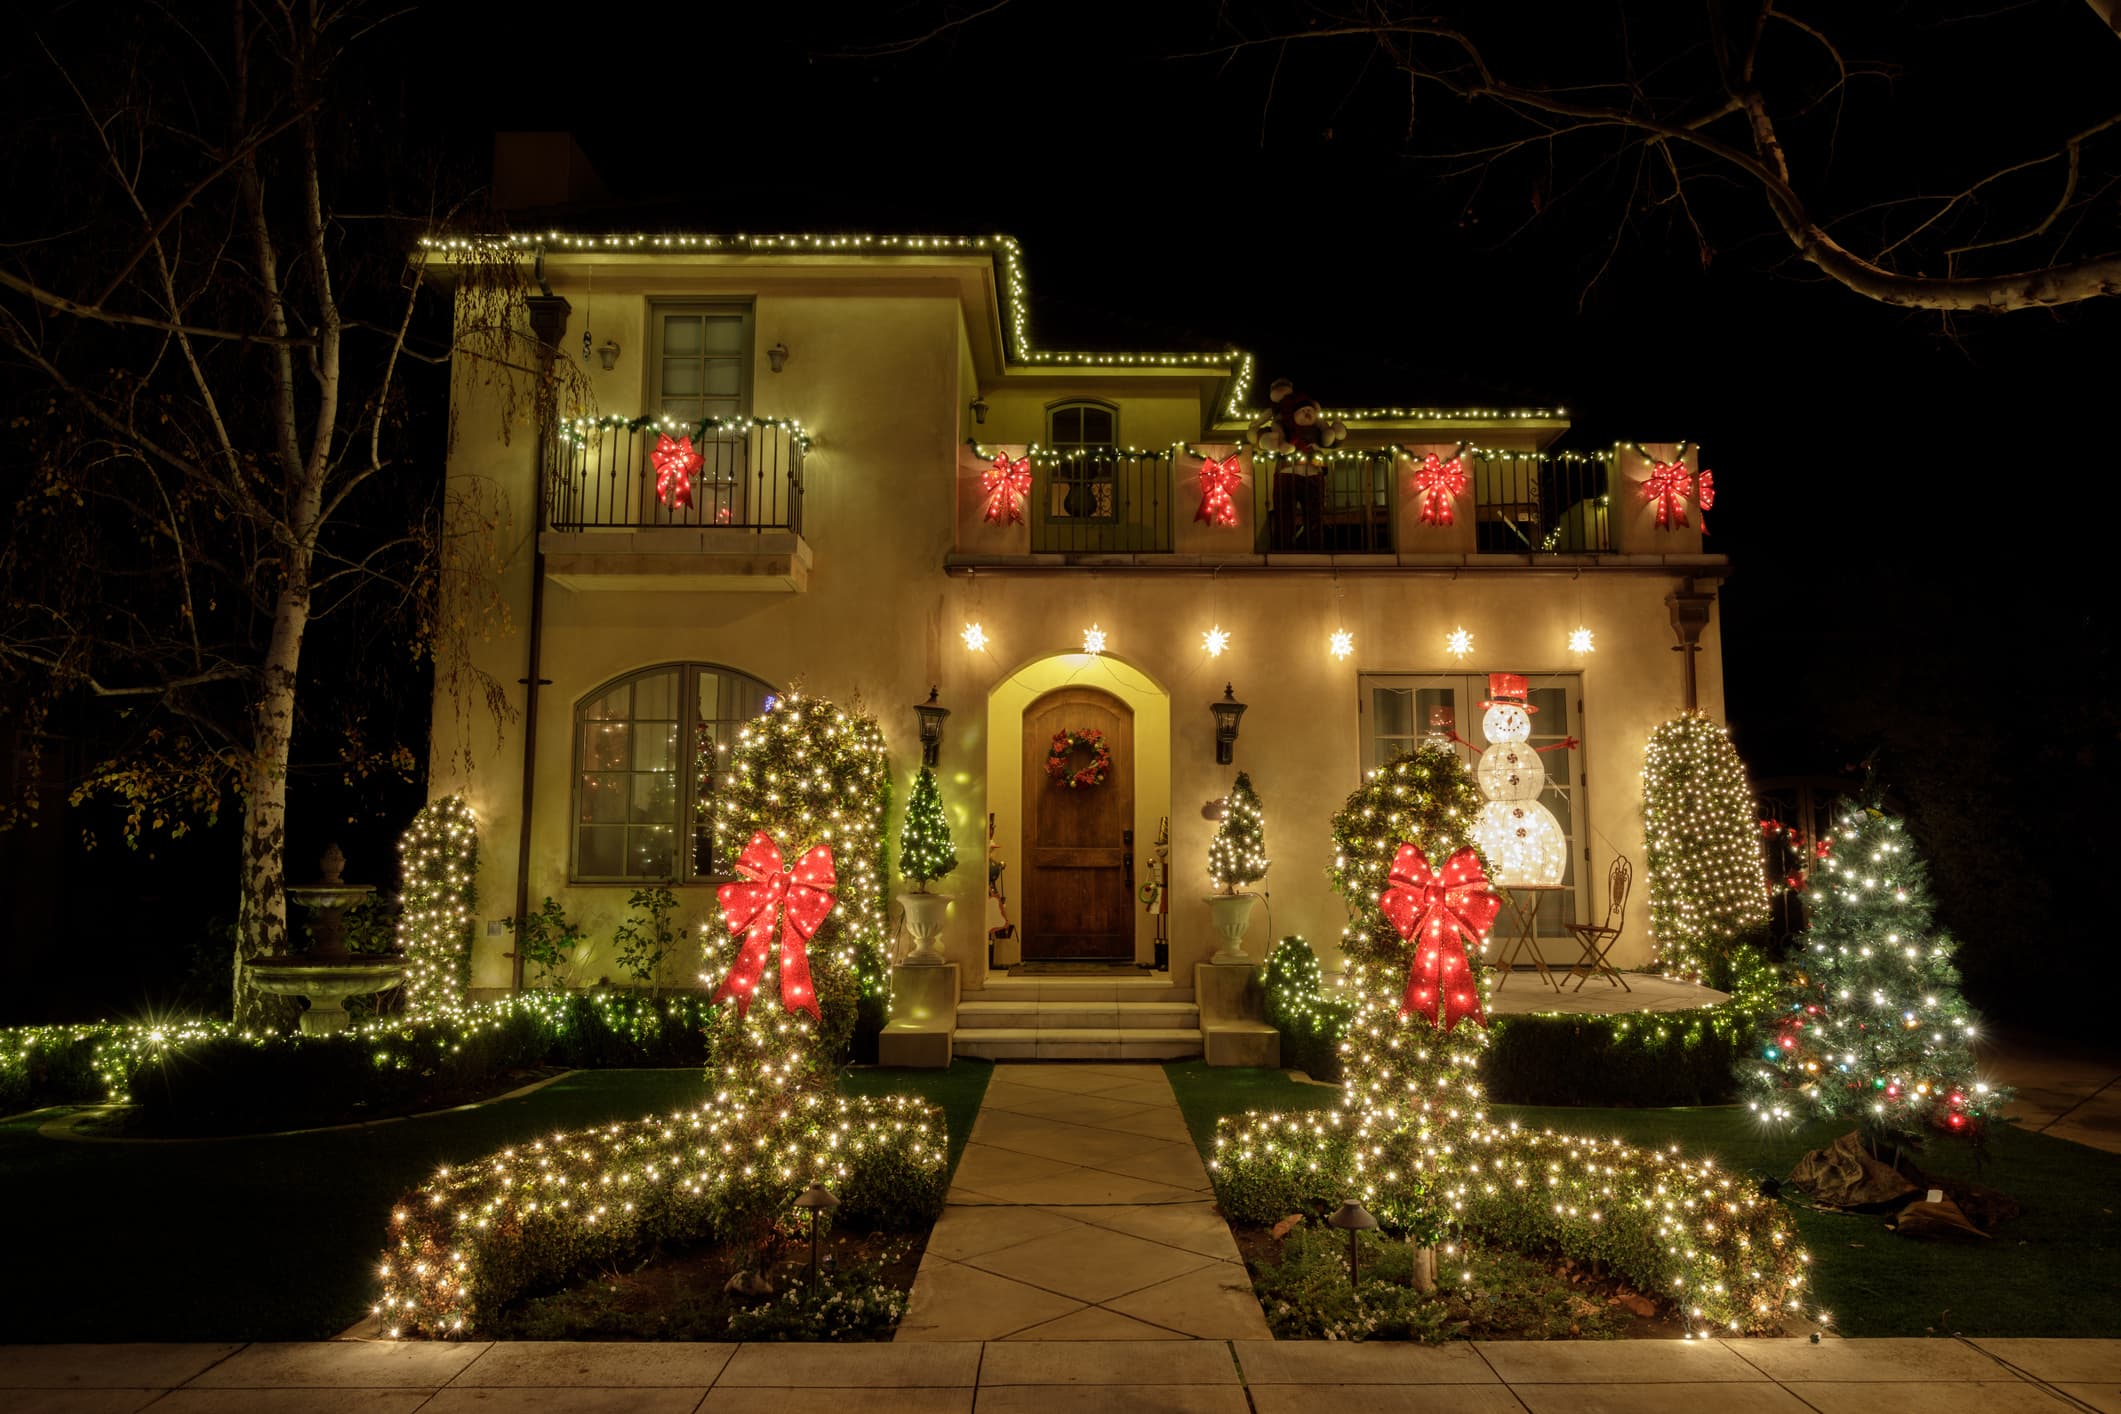 Home in warm climate with holiday decorations and lights